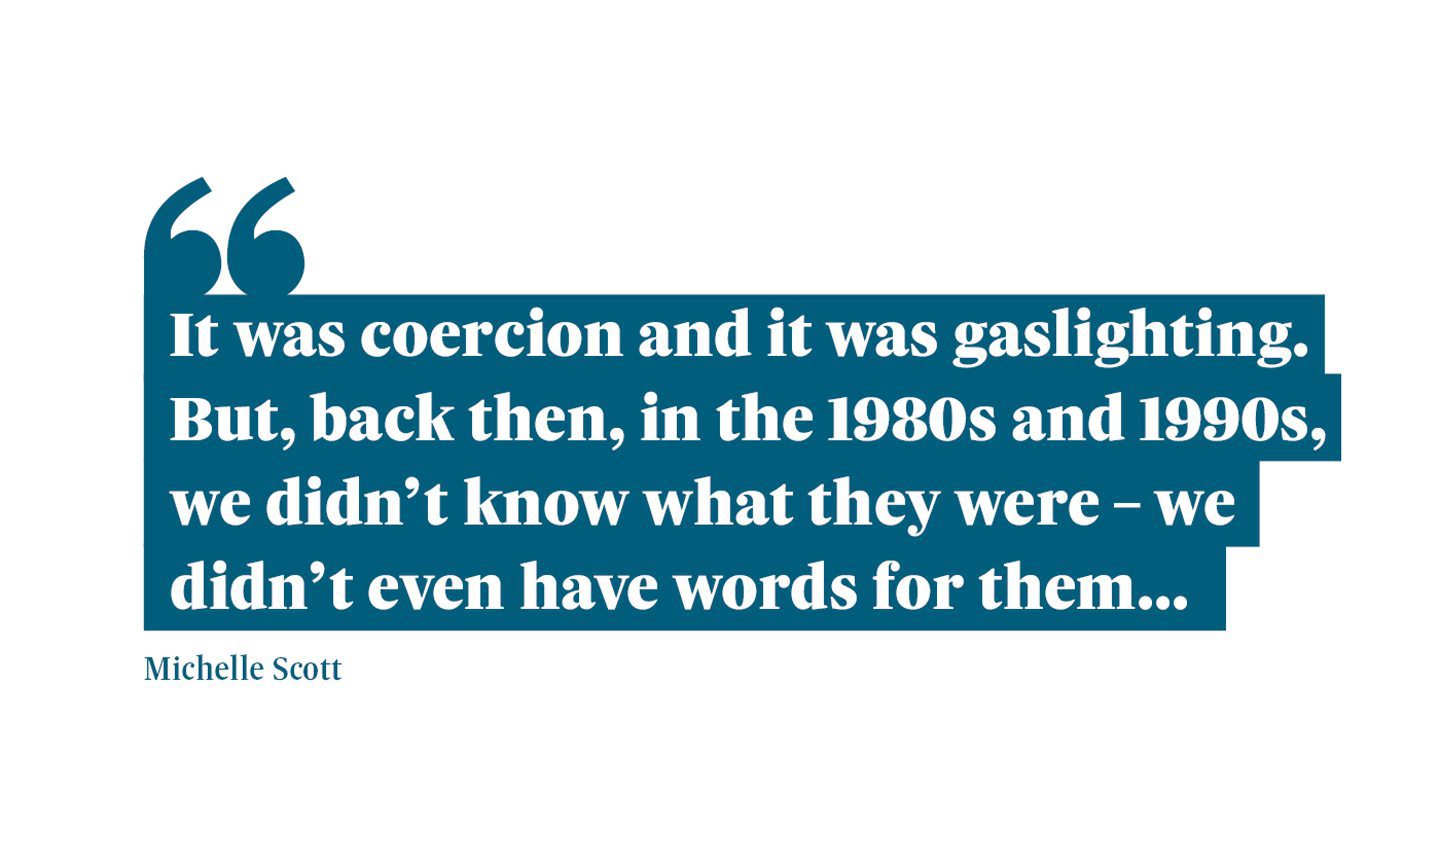 Quotation from Michelle Scott: "It was coercion and it was gaslighting. But, back then, in the 1980s and 1990s, we didn't know what they were - we didn't even have words for them..."